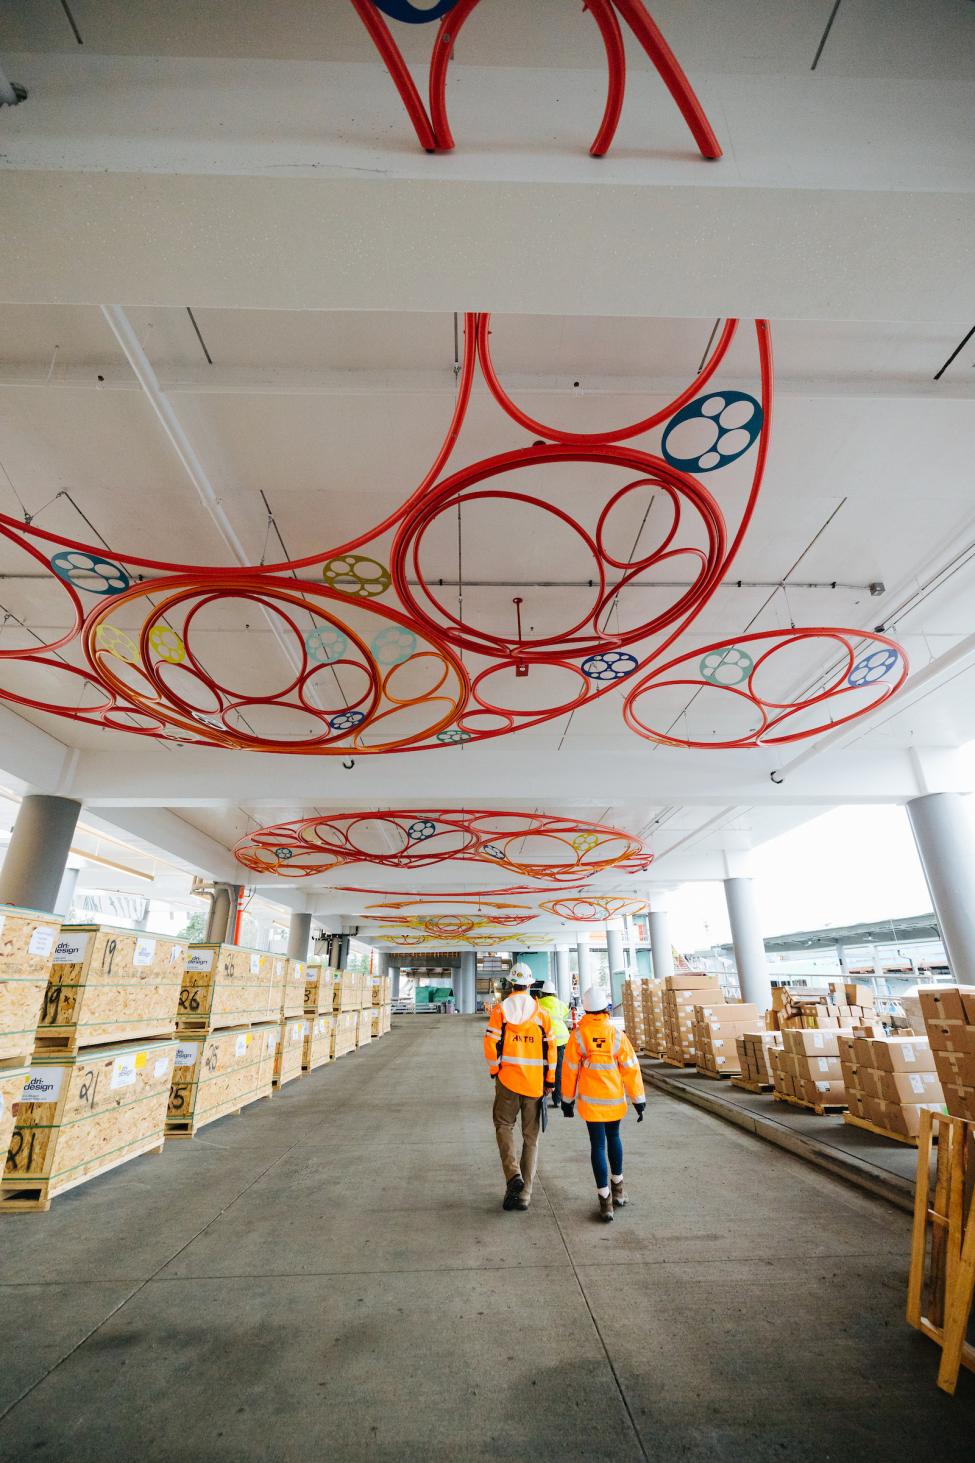 Colorful art was installed on the ceiling of the parking garage at the future Redmond Technology Station.